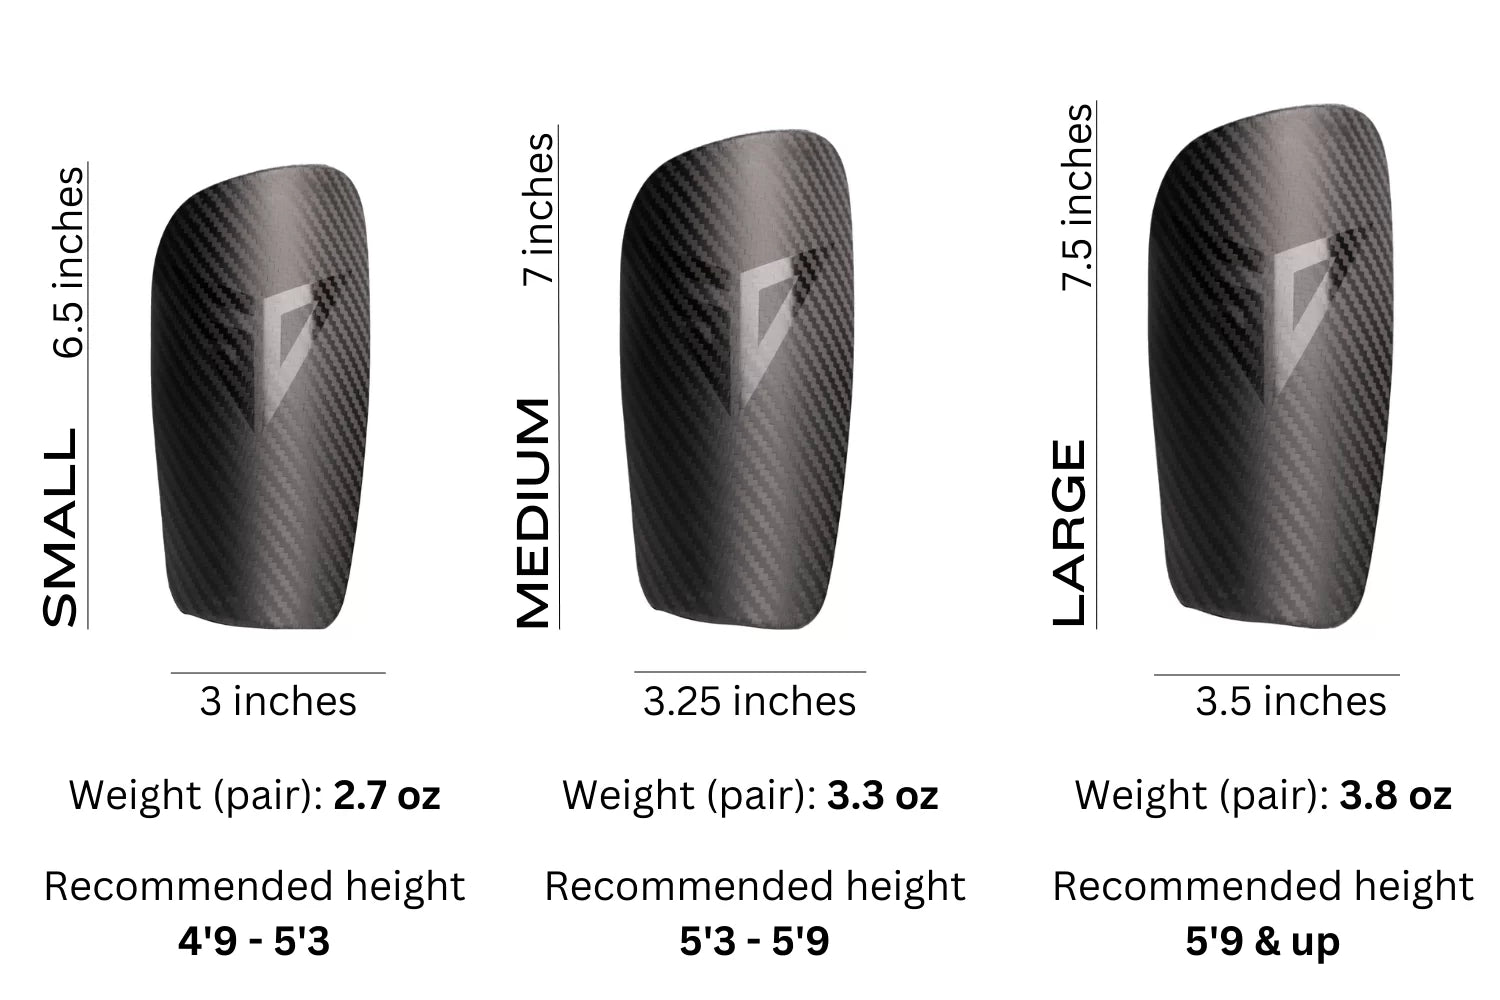 Benefits of Carbon Fiber Shin Guards presented by @yjfootball